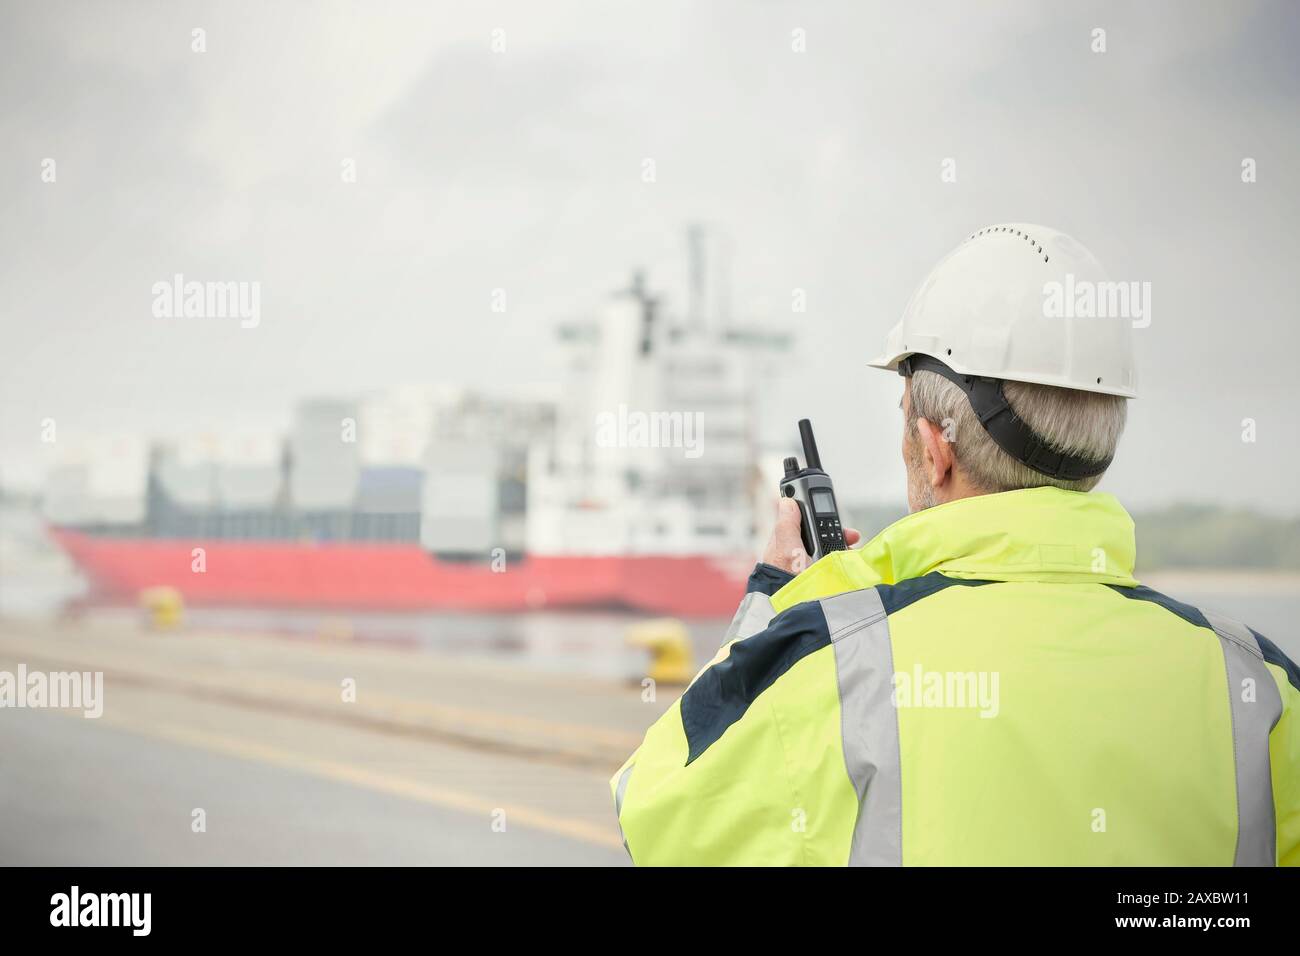 Dock manager with walkie-talkie watching container ship at commercial dock Stock Photo